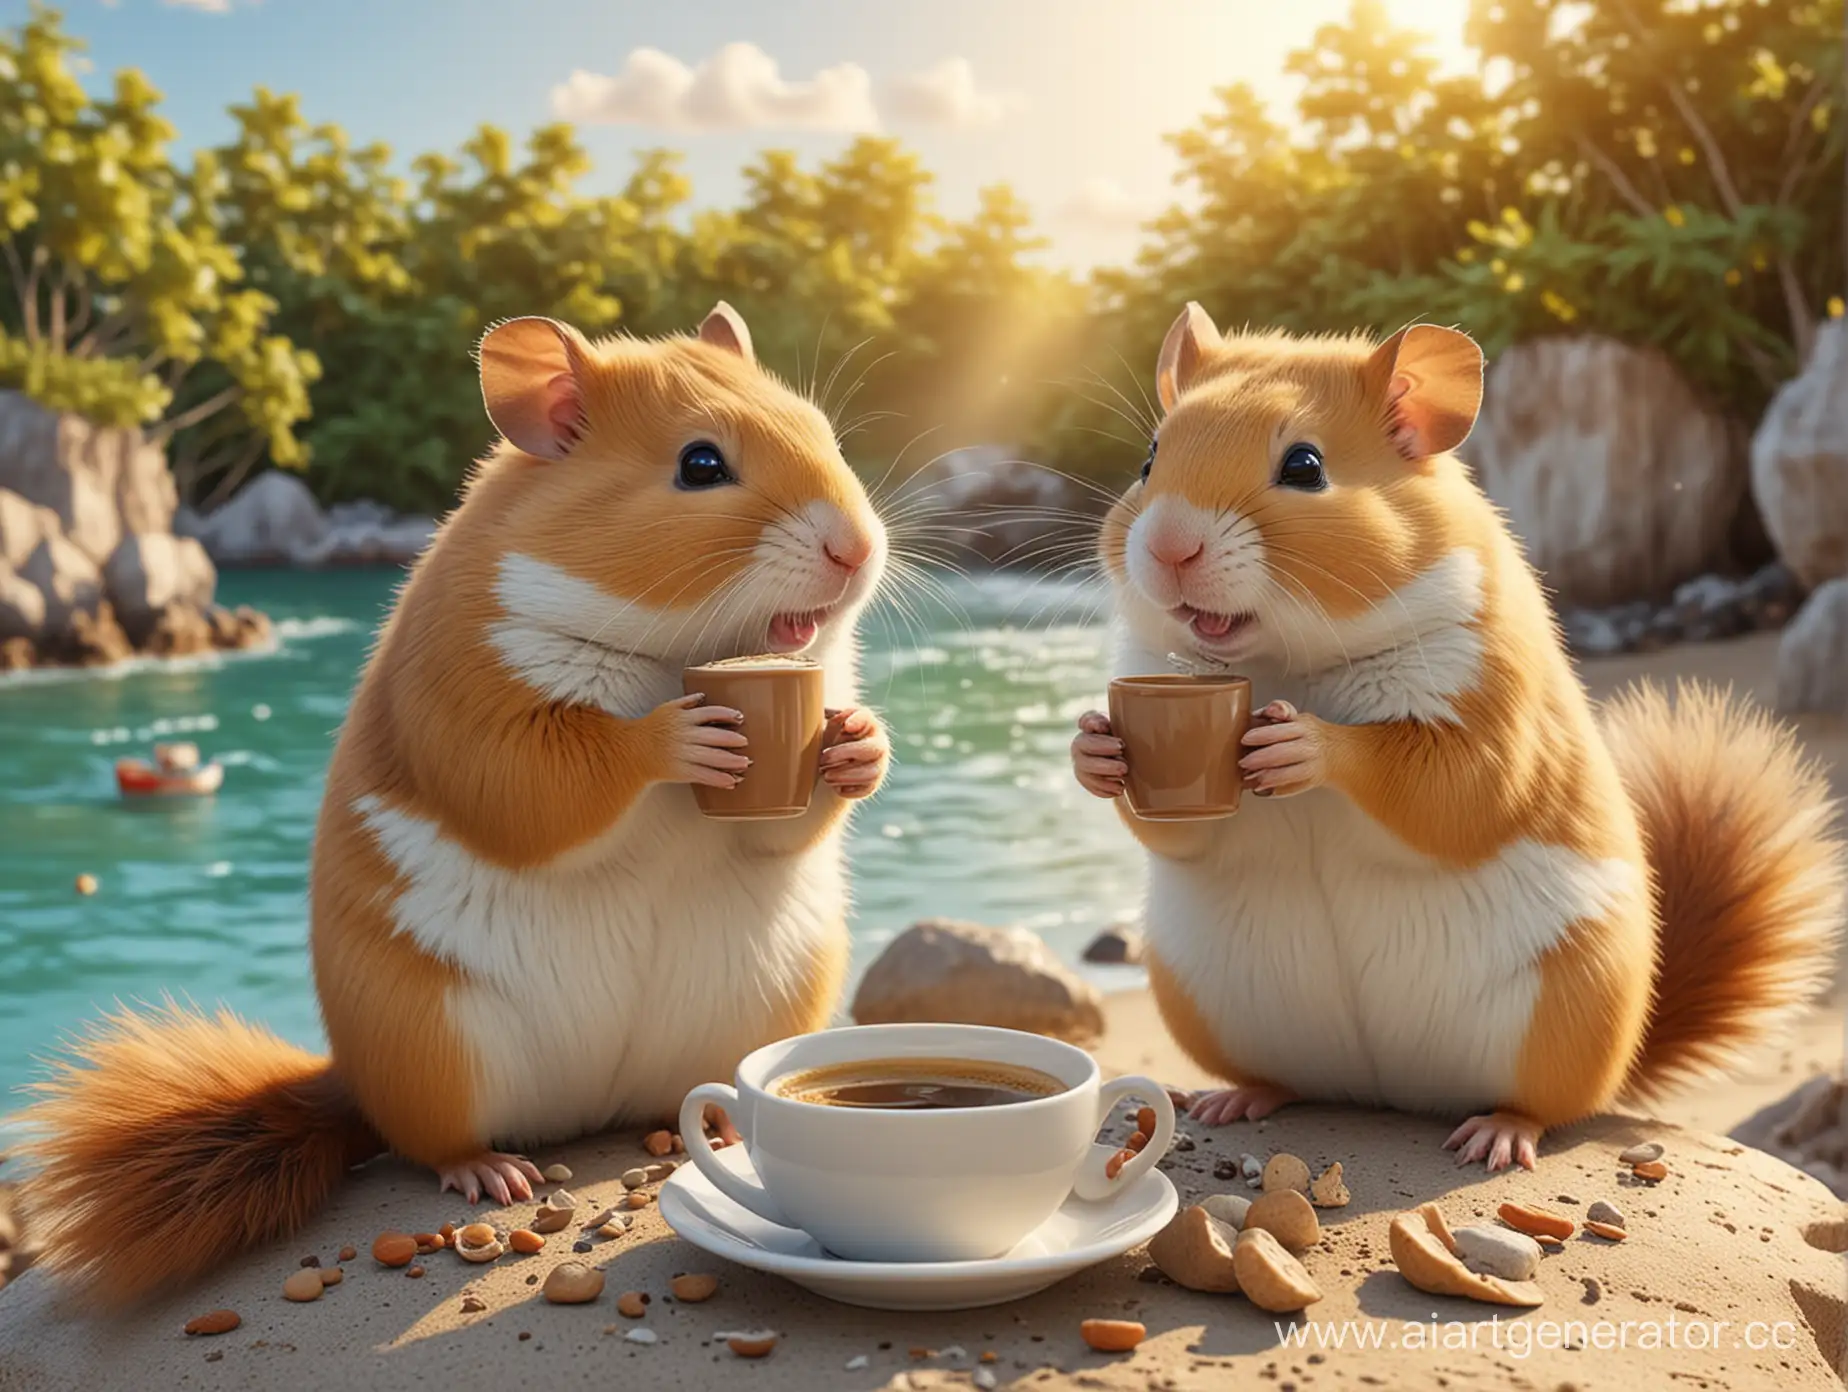 Cheerful-Hamster-and-Squirrel-Enjoying-Coffee-by-the-Shore